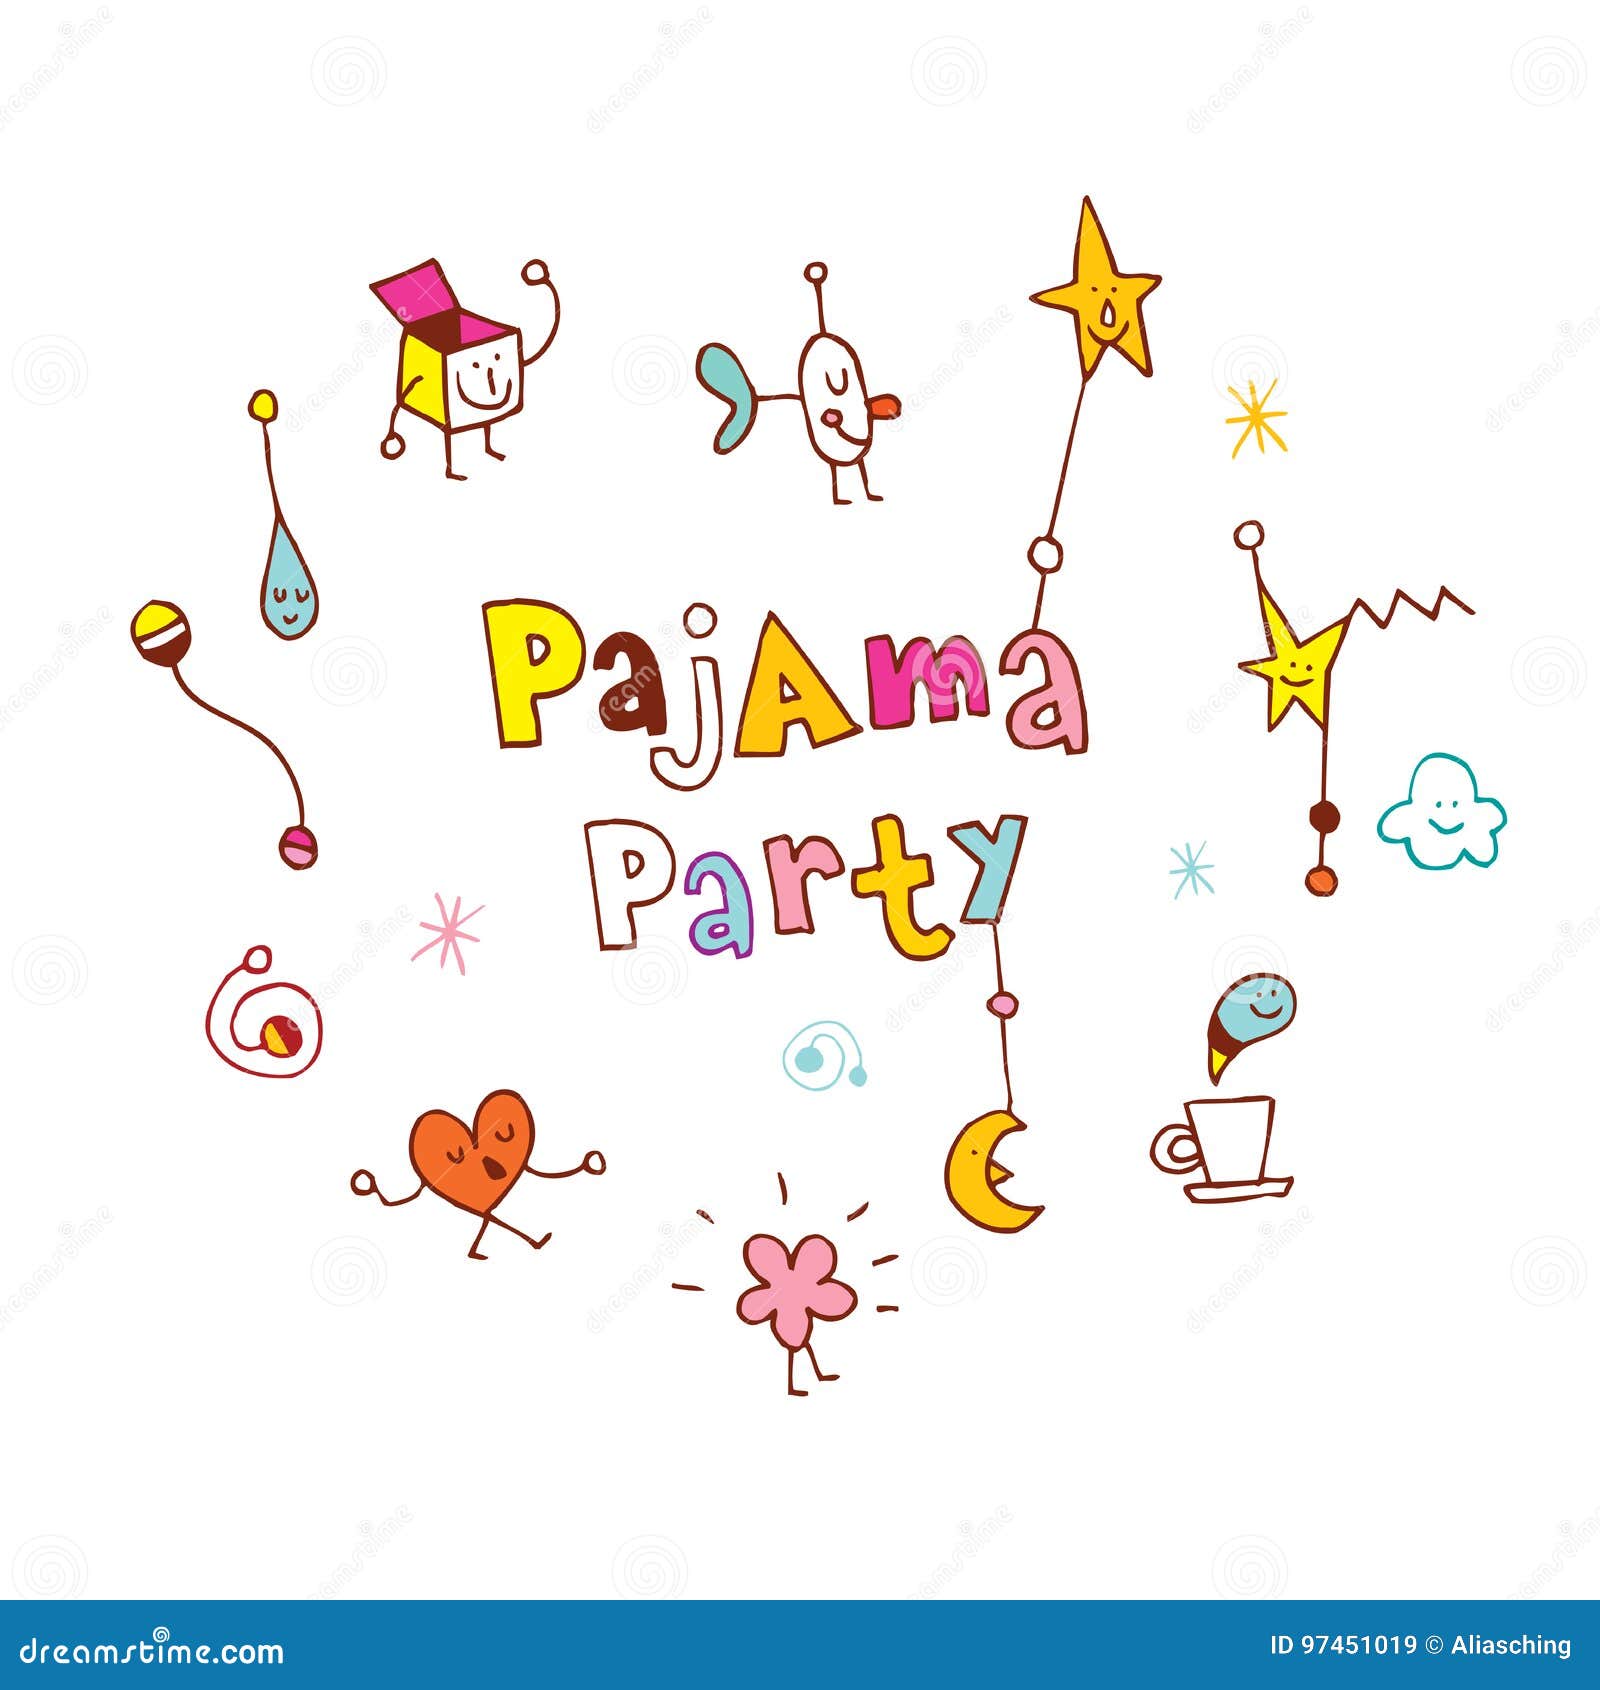 Pajama party stock vector. Illustration of bonding, together - 97451019